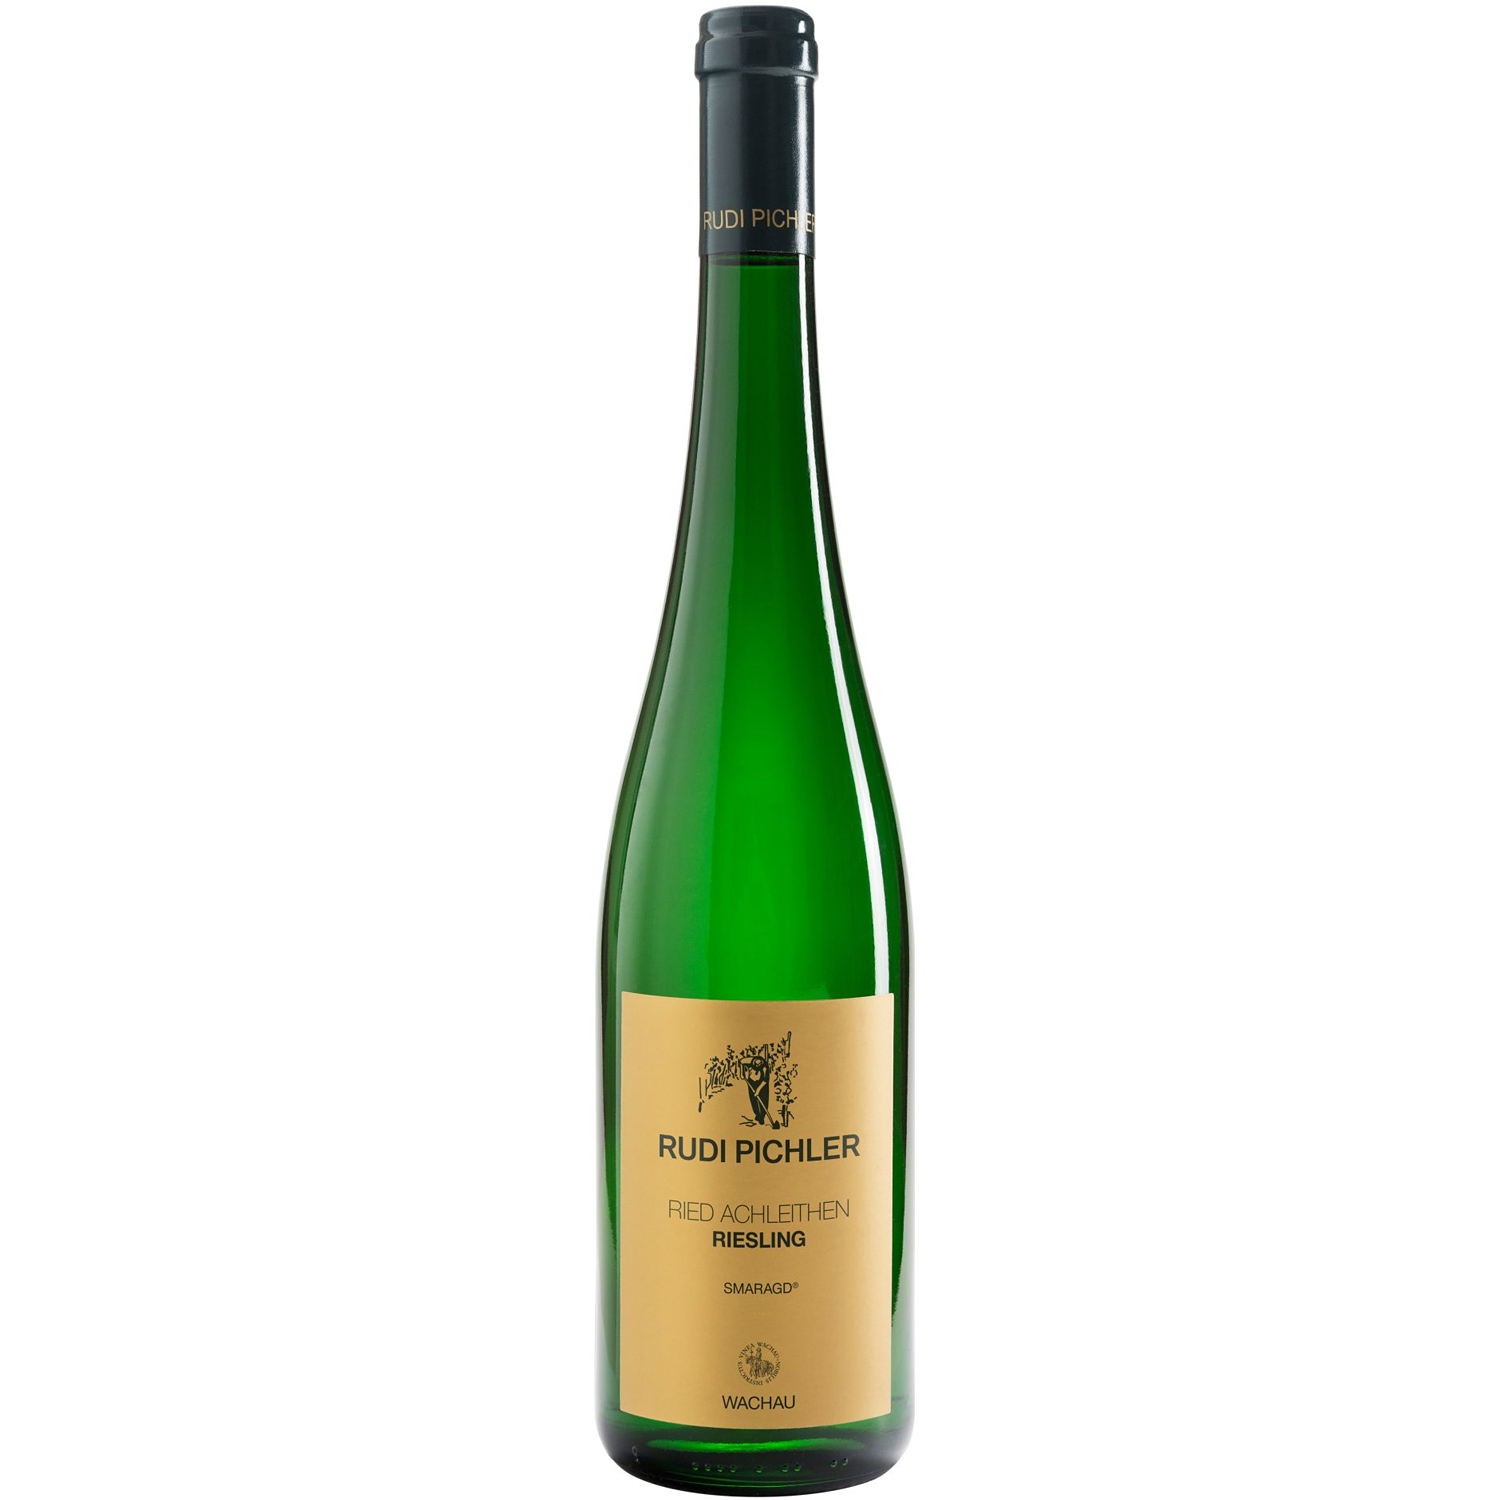 Rudi Pichler Ried Achleithen Riesling Smaragd 2020